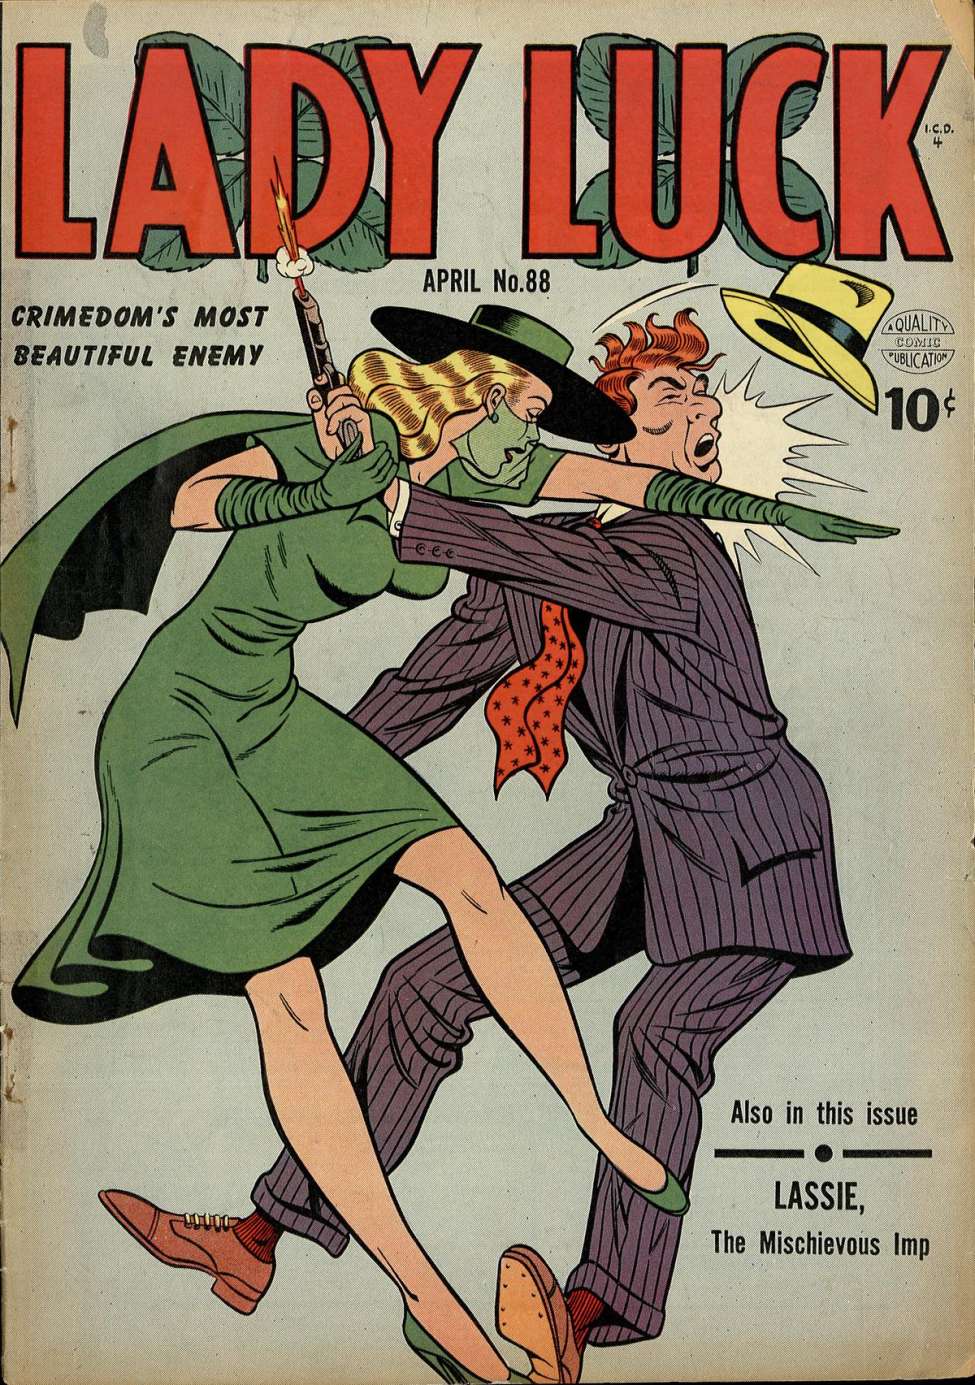 Book Cover For Lady Luck 88